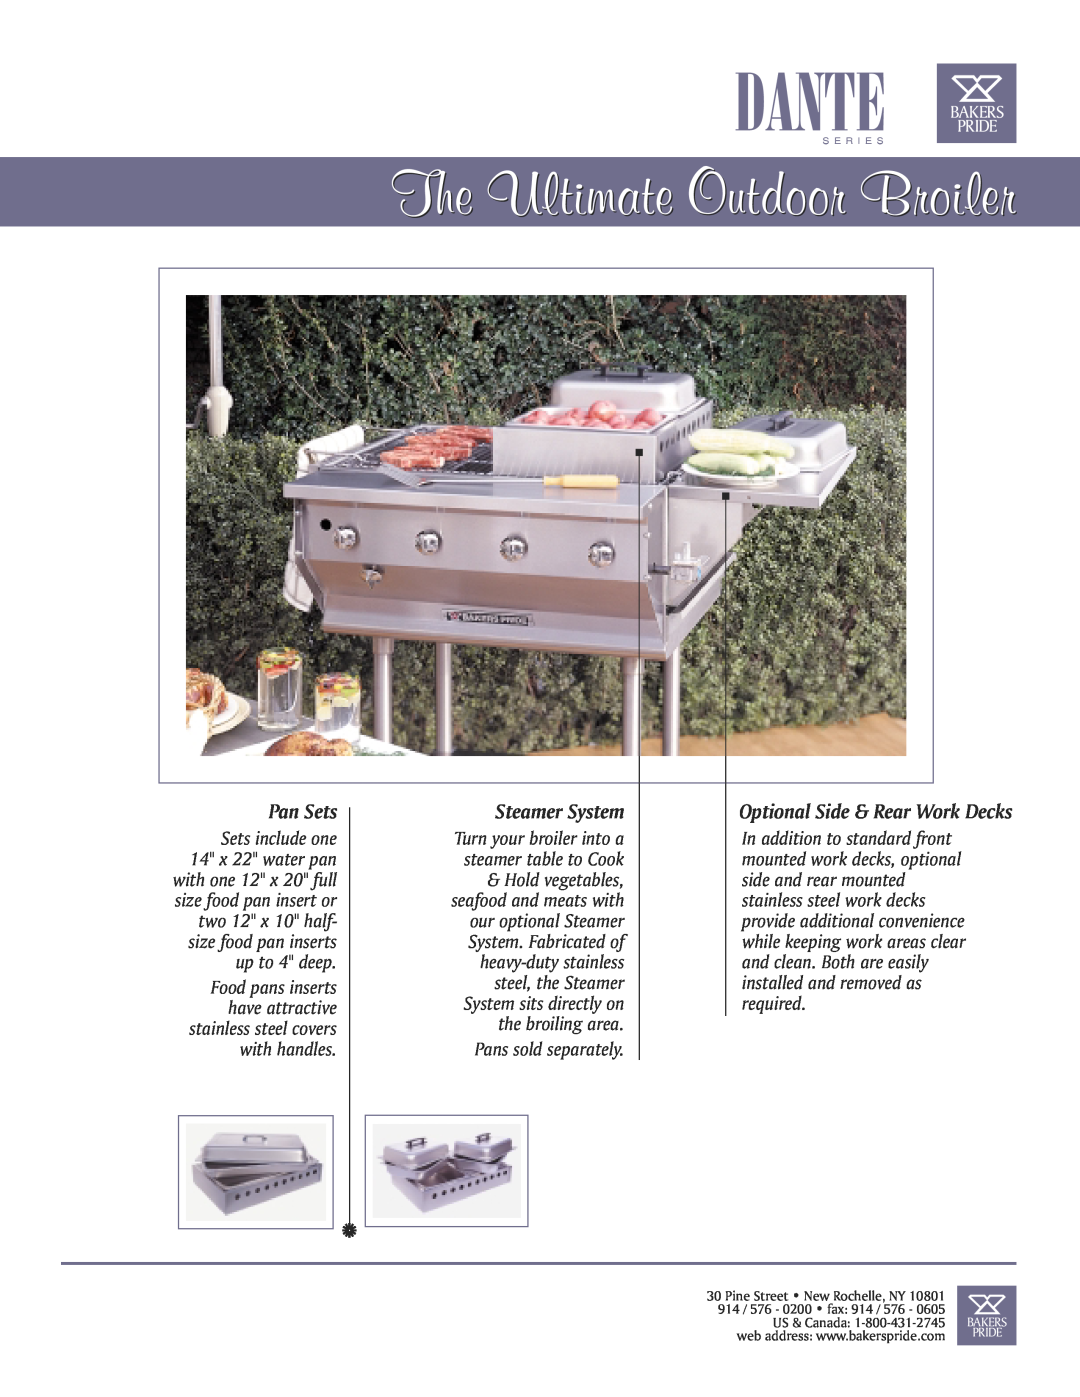 Bakers Pride Oven CBBQ-60S-CP manual Pan Sets, Steamer System, Optional Side & Rear Work Decks, Pans sold separately, Pride 